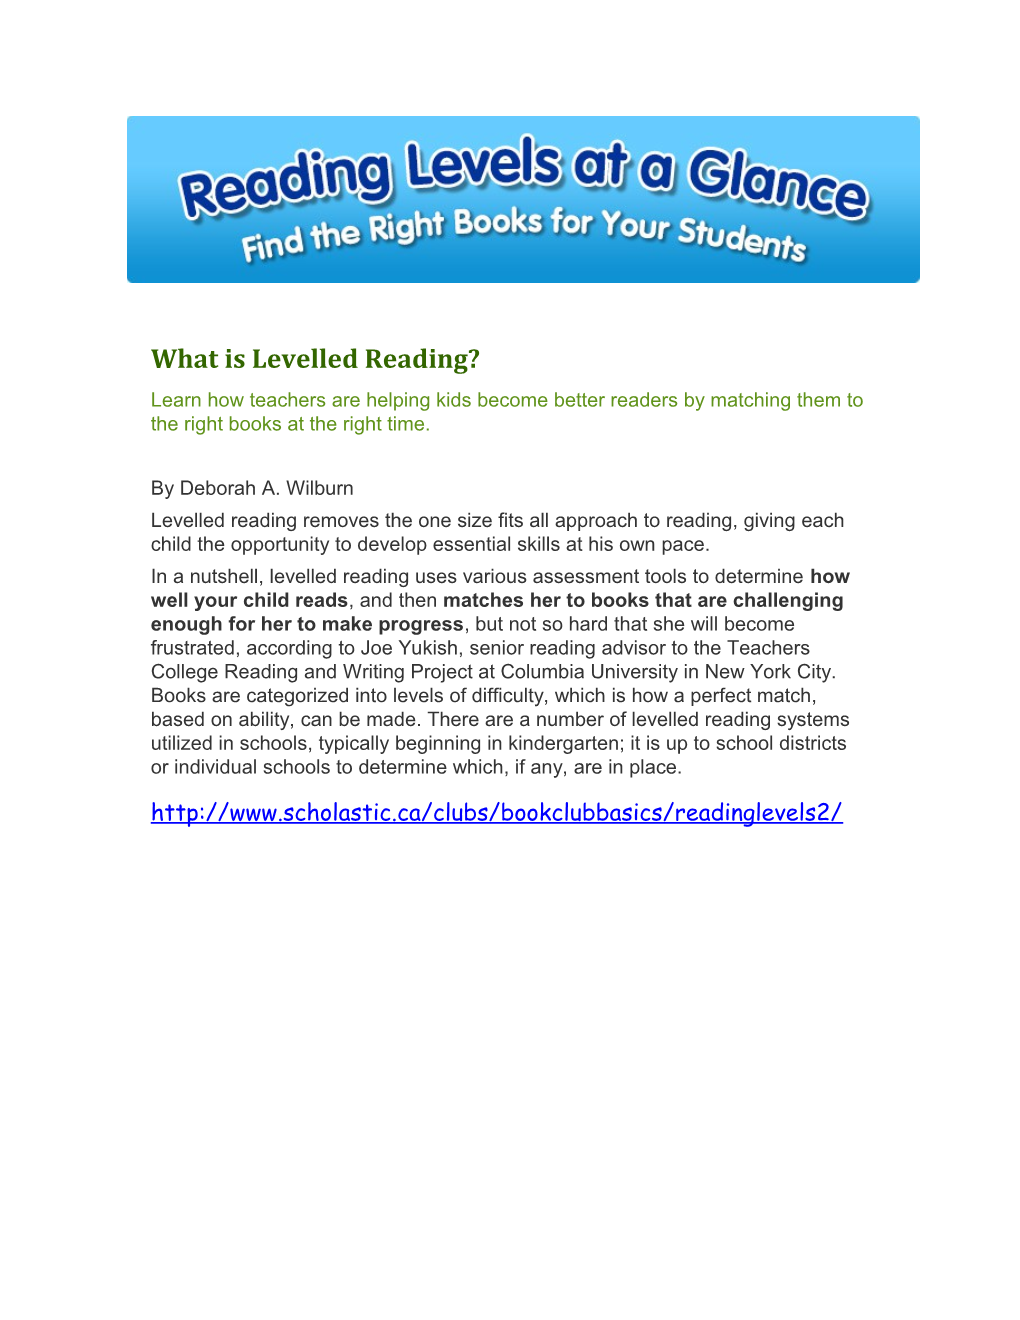 What Is Levelled Reading?